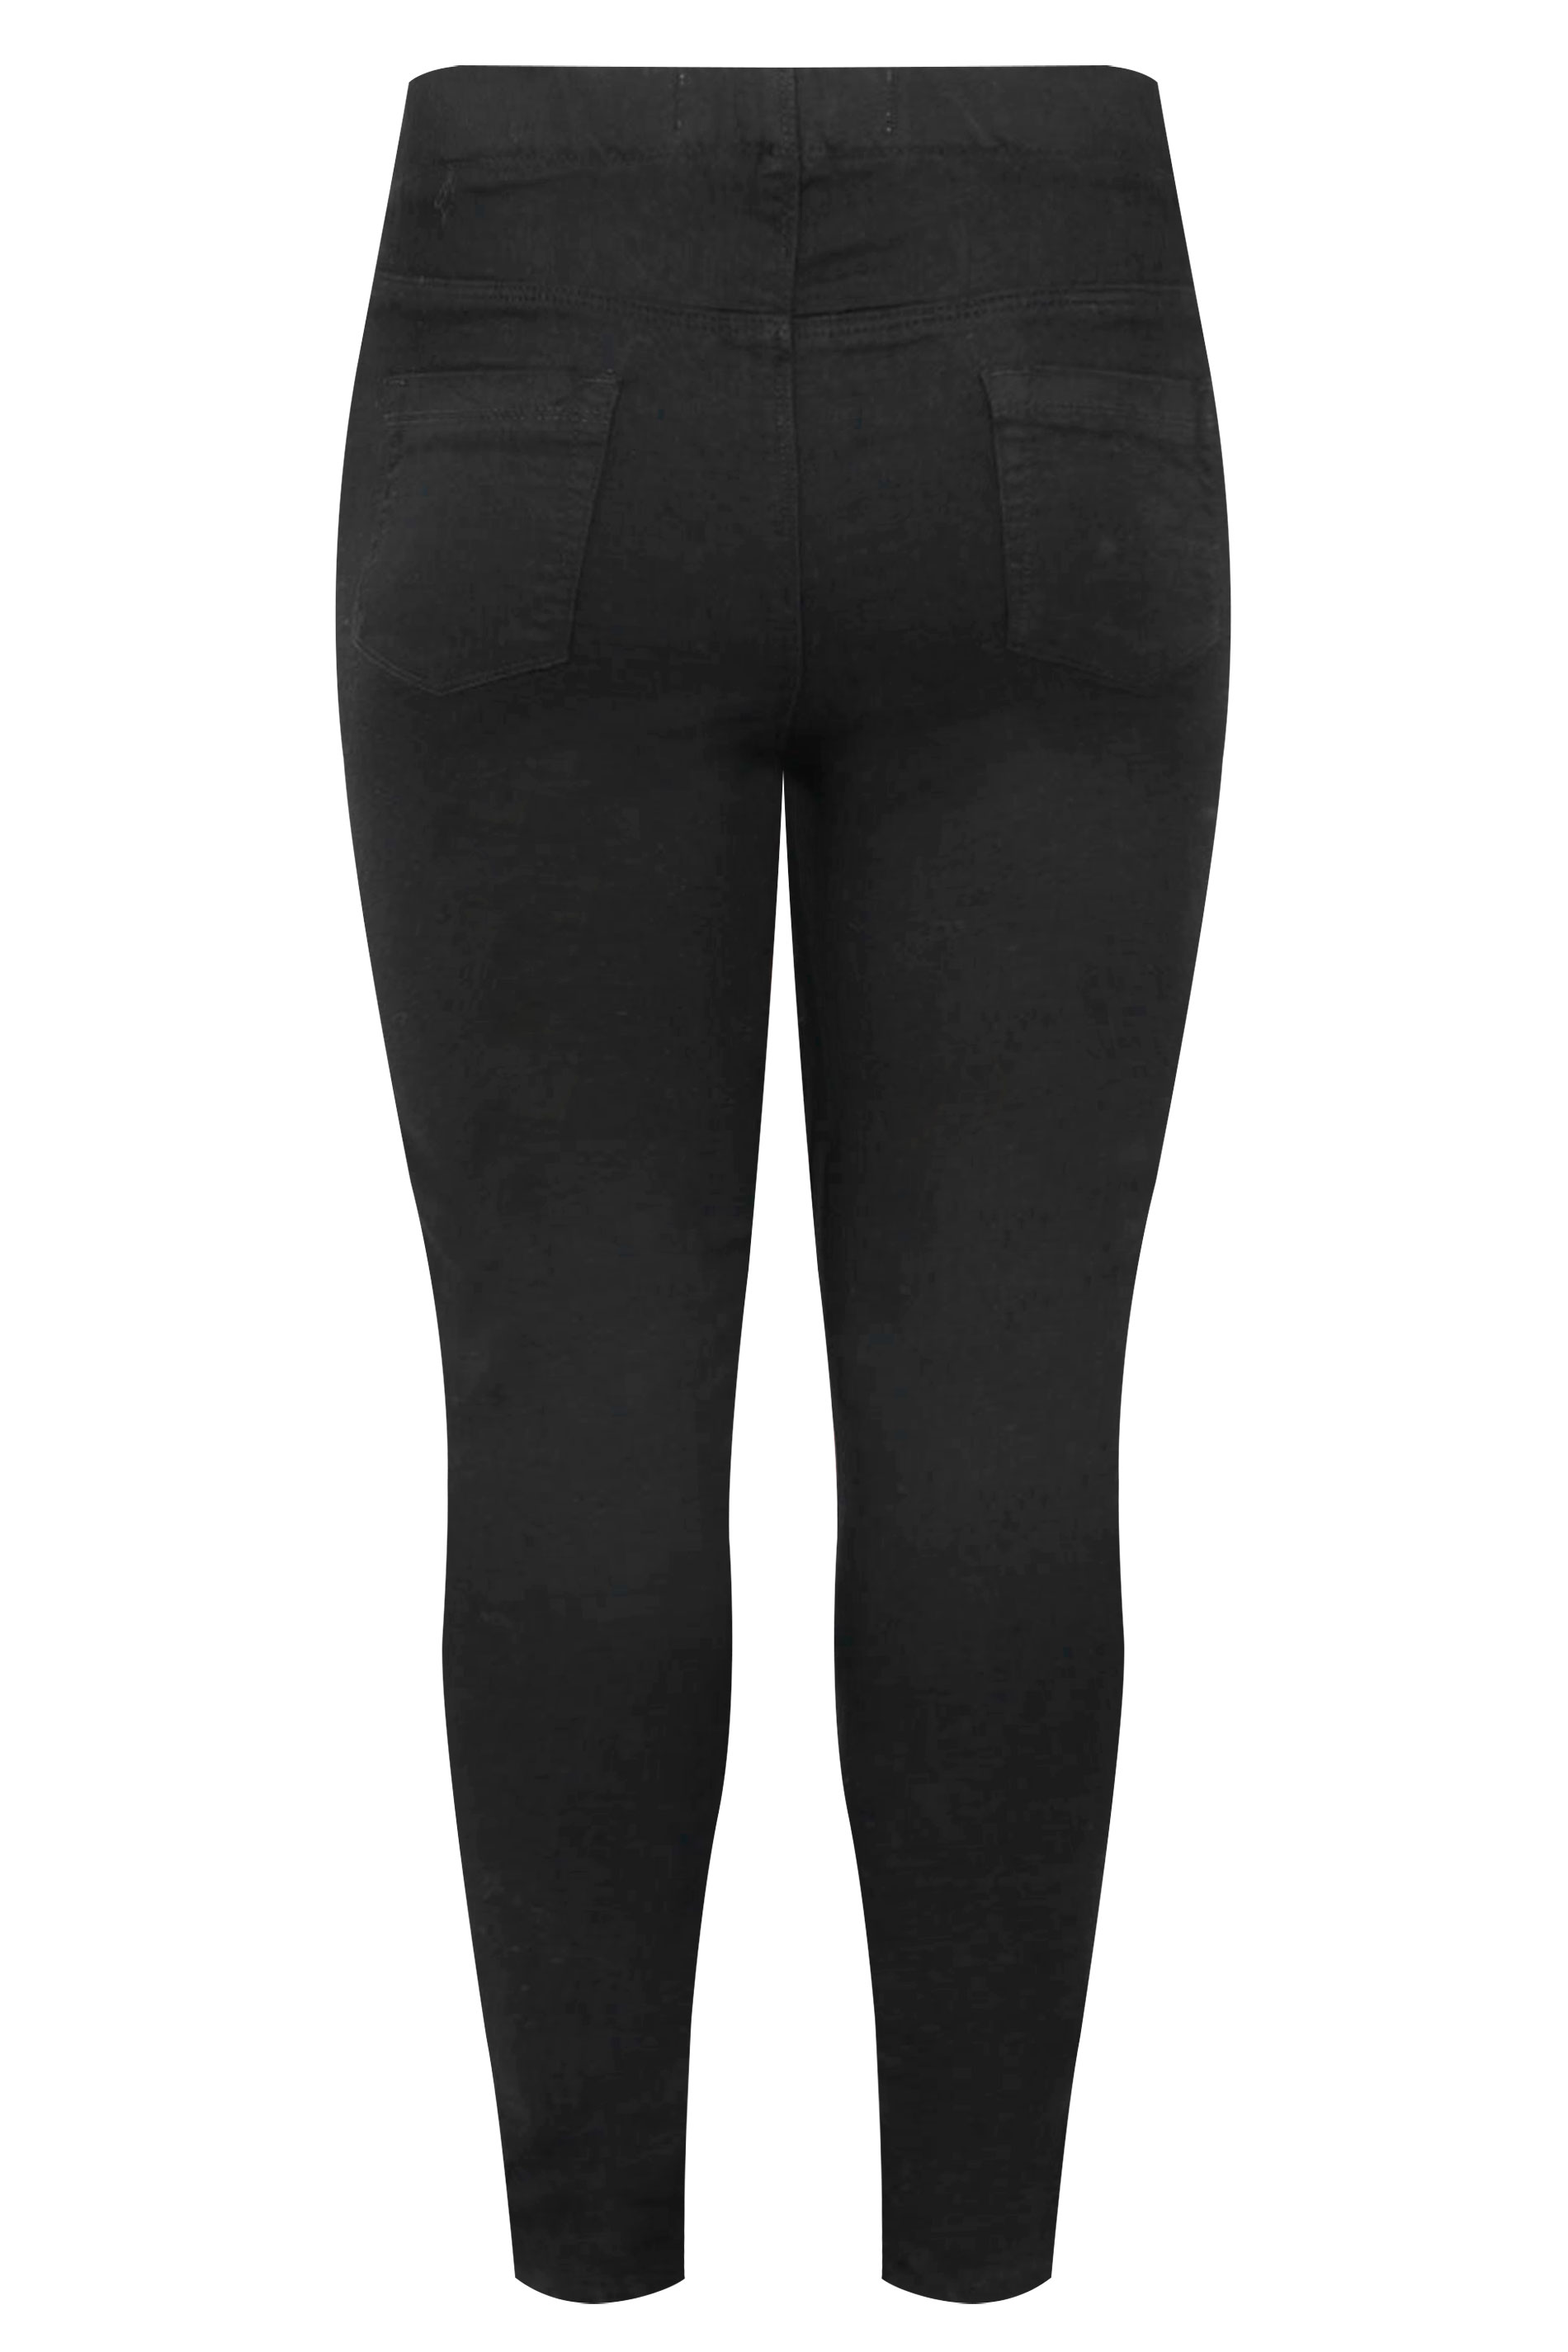 Plus Size Black Pull On JENNY Jeggings | Yours Clothing